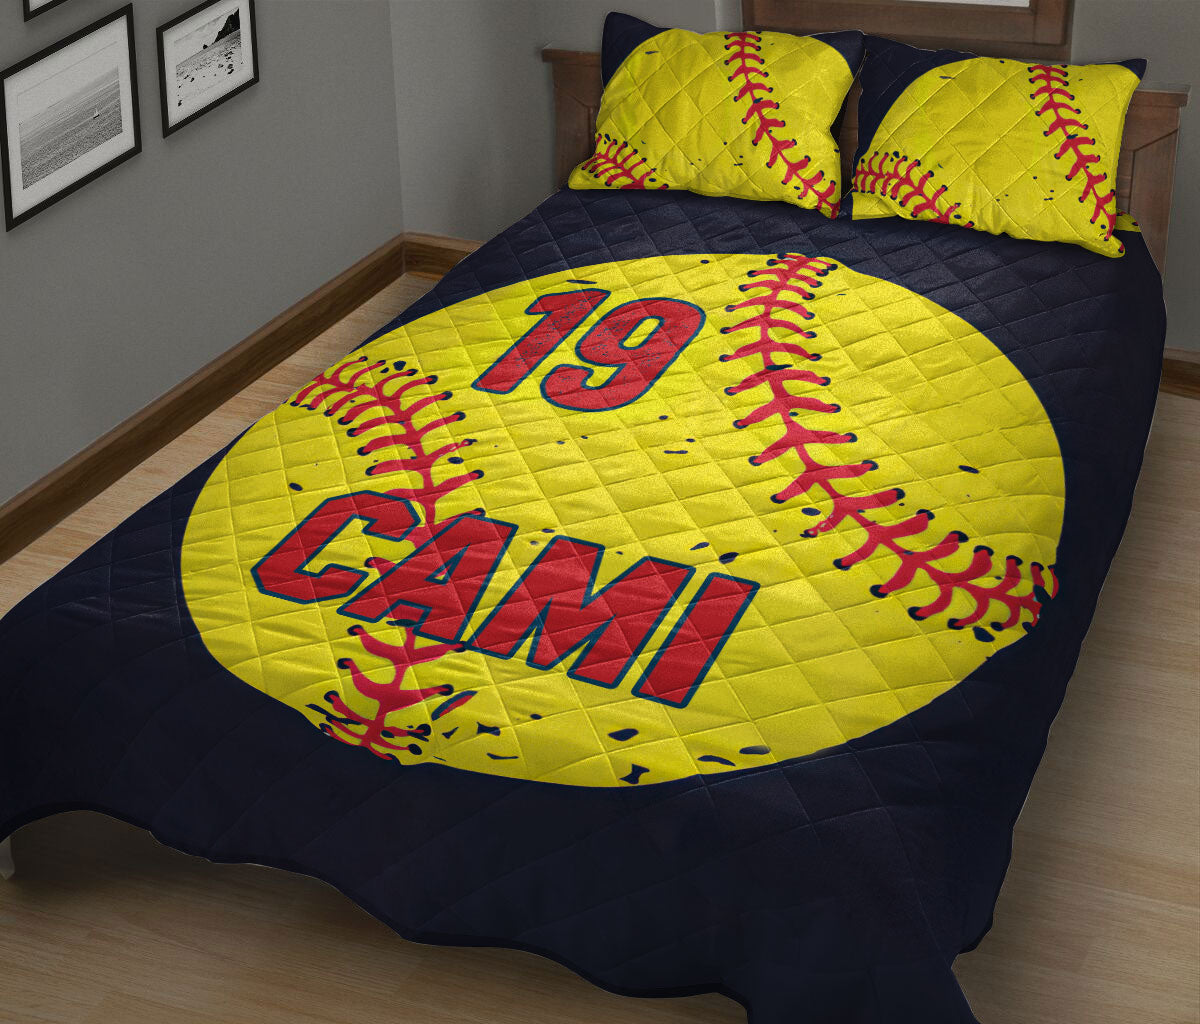 Ohaprints-Quilt-Bed-Set-Pillowcase-Softball-Black-Yellow-Ball-Gift-For-Fan-Lovers-Custom-Personalized-Name-Number-Blanket-Bedspread-Bedding-316-King (90'' x 100'')